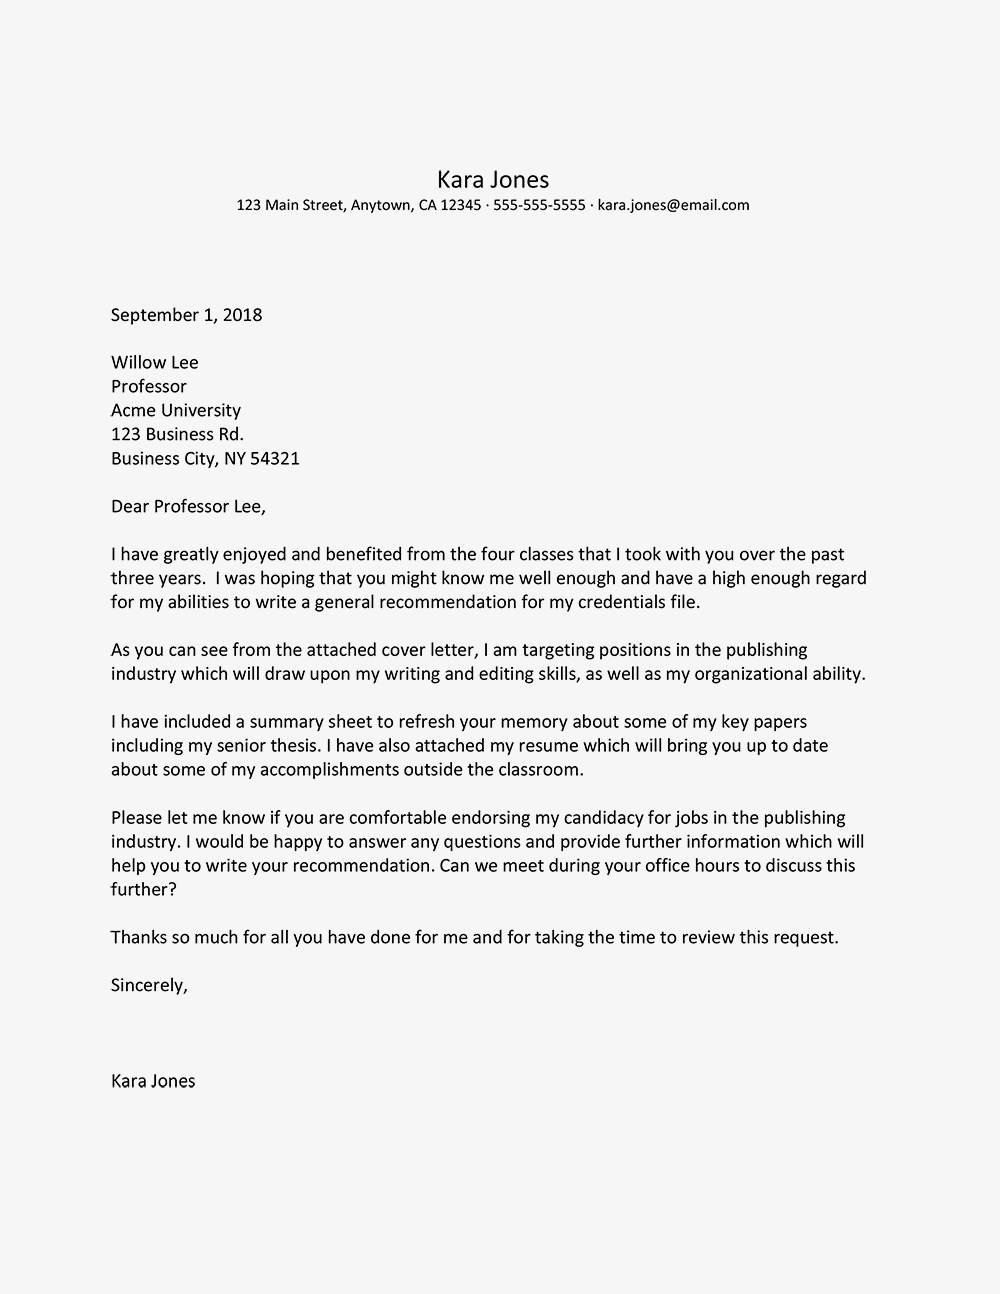 Letter Of Recommendation Request Email Debandje within proportions 1000 X 1294